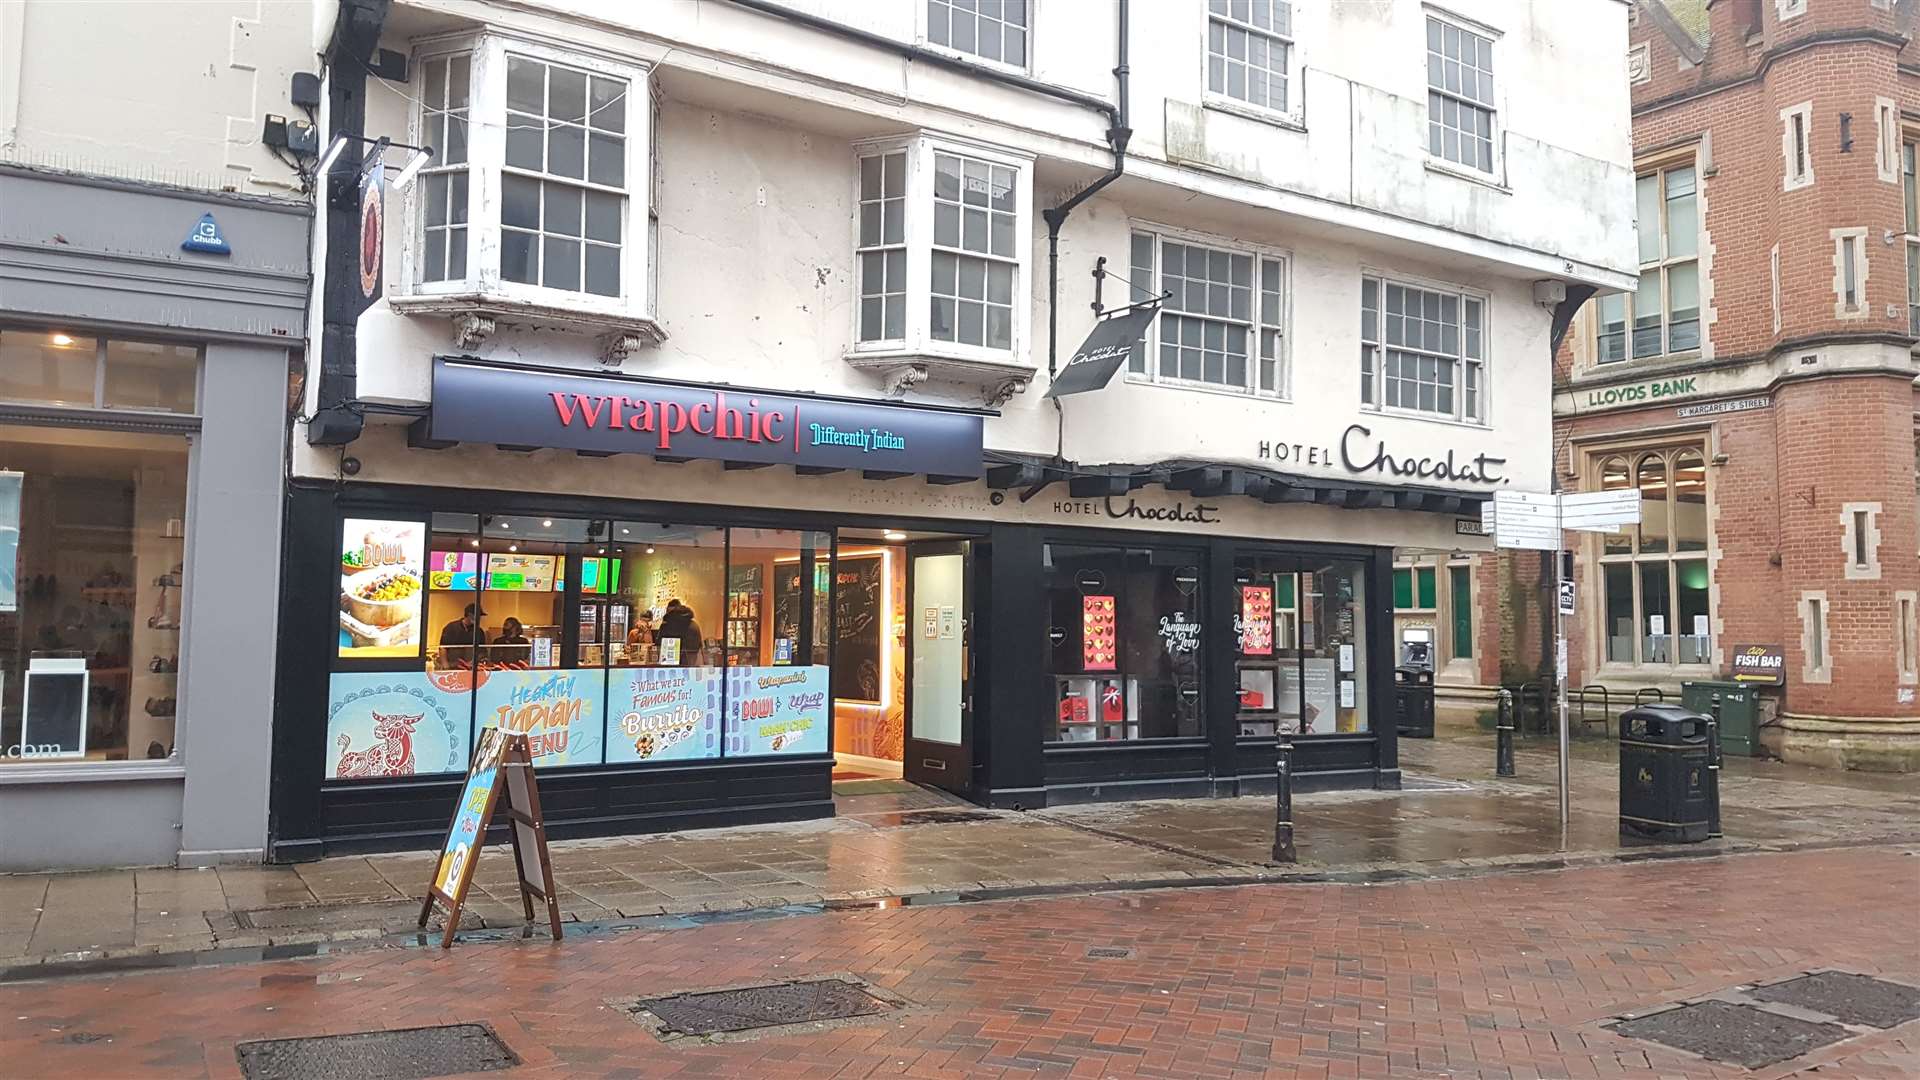 Wrapchic has launched in Canterbury high street